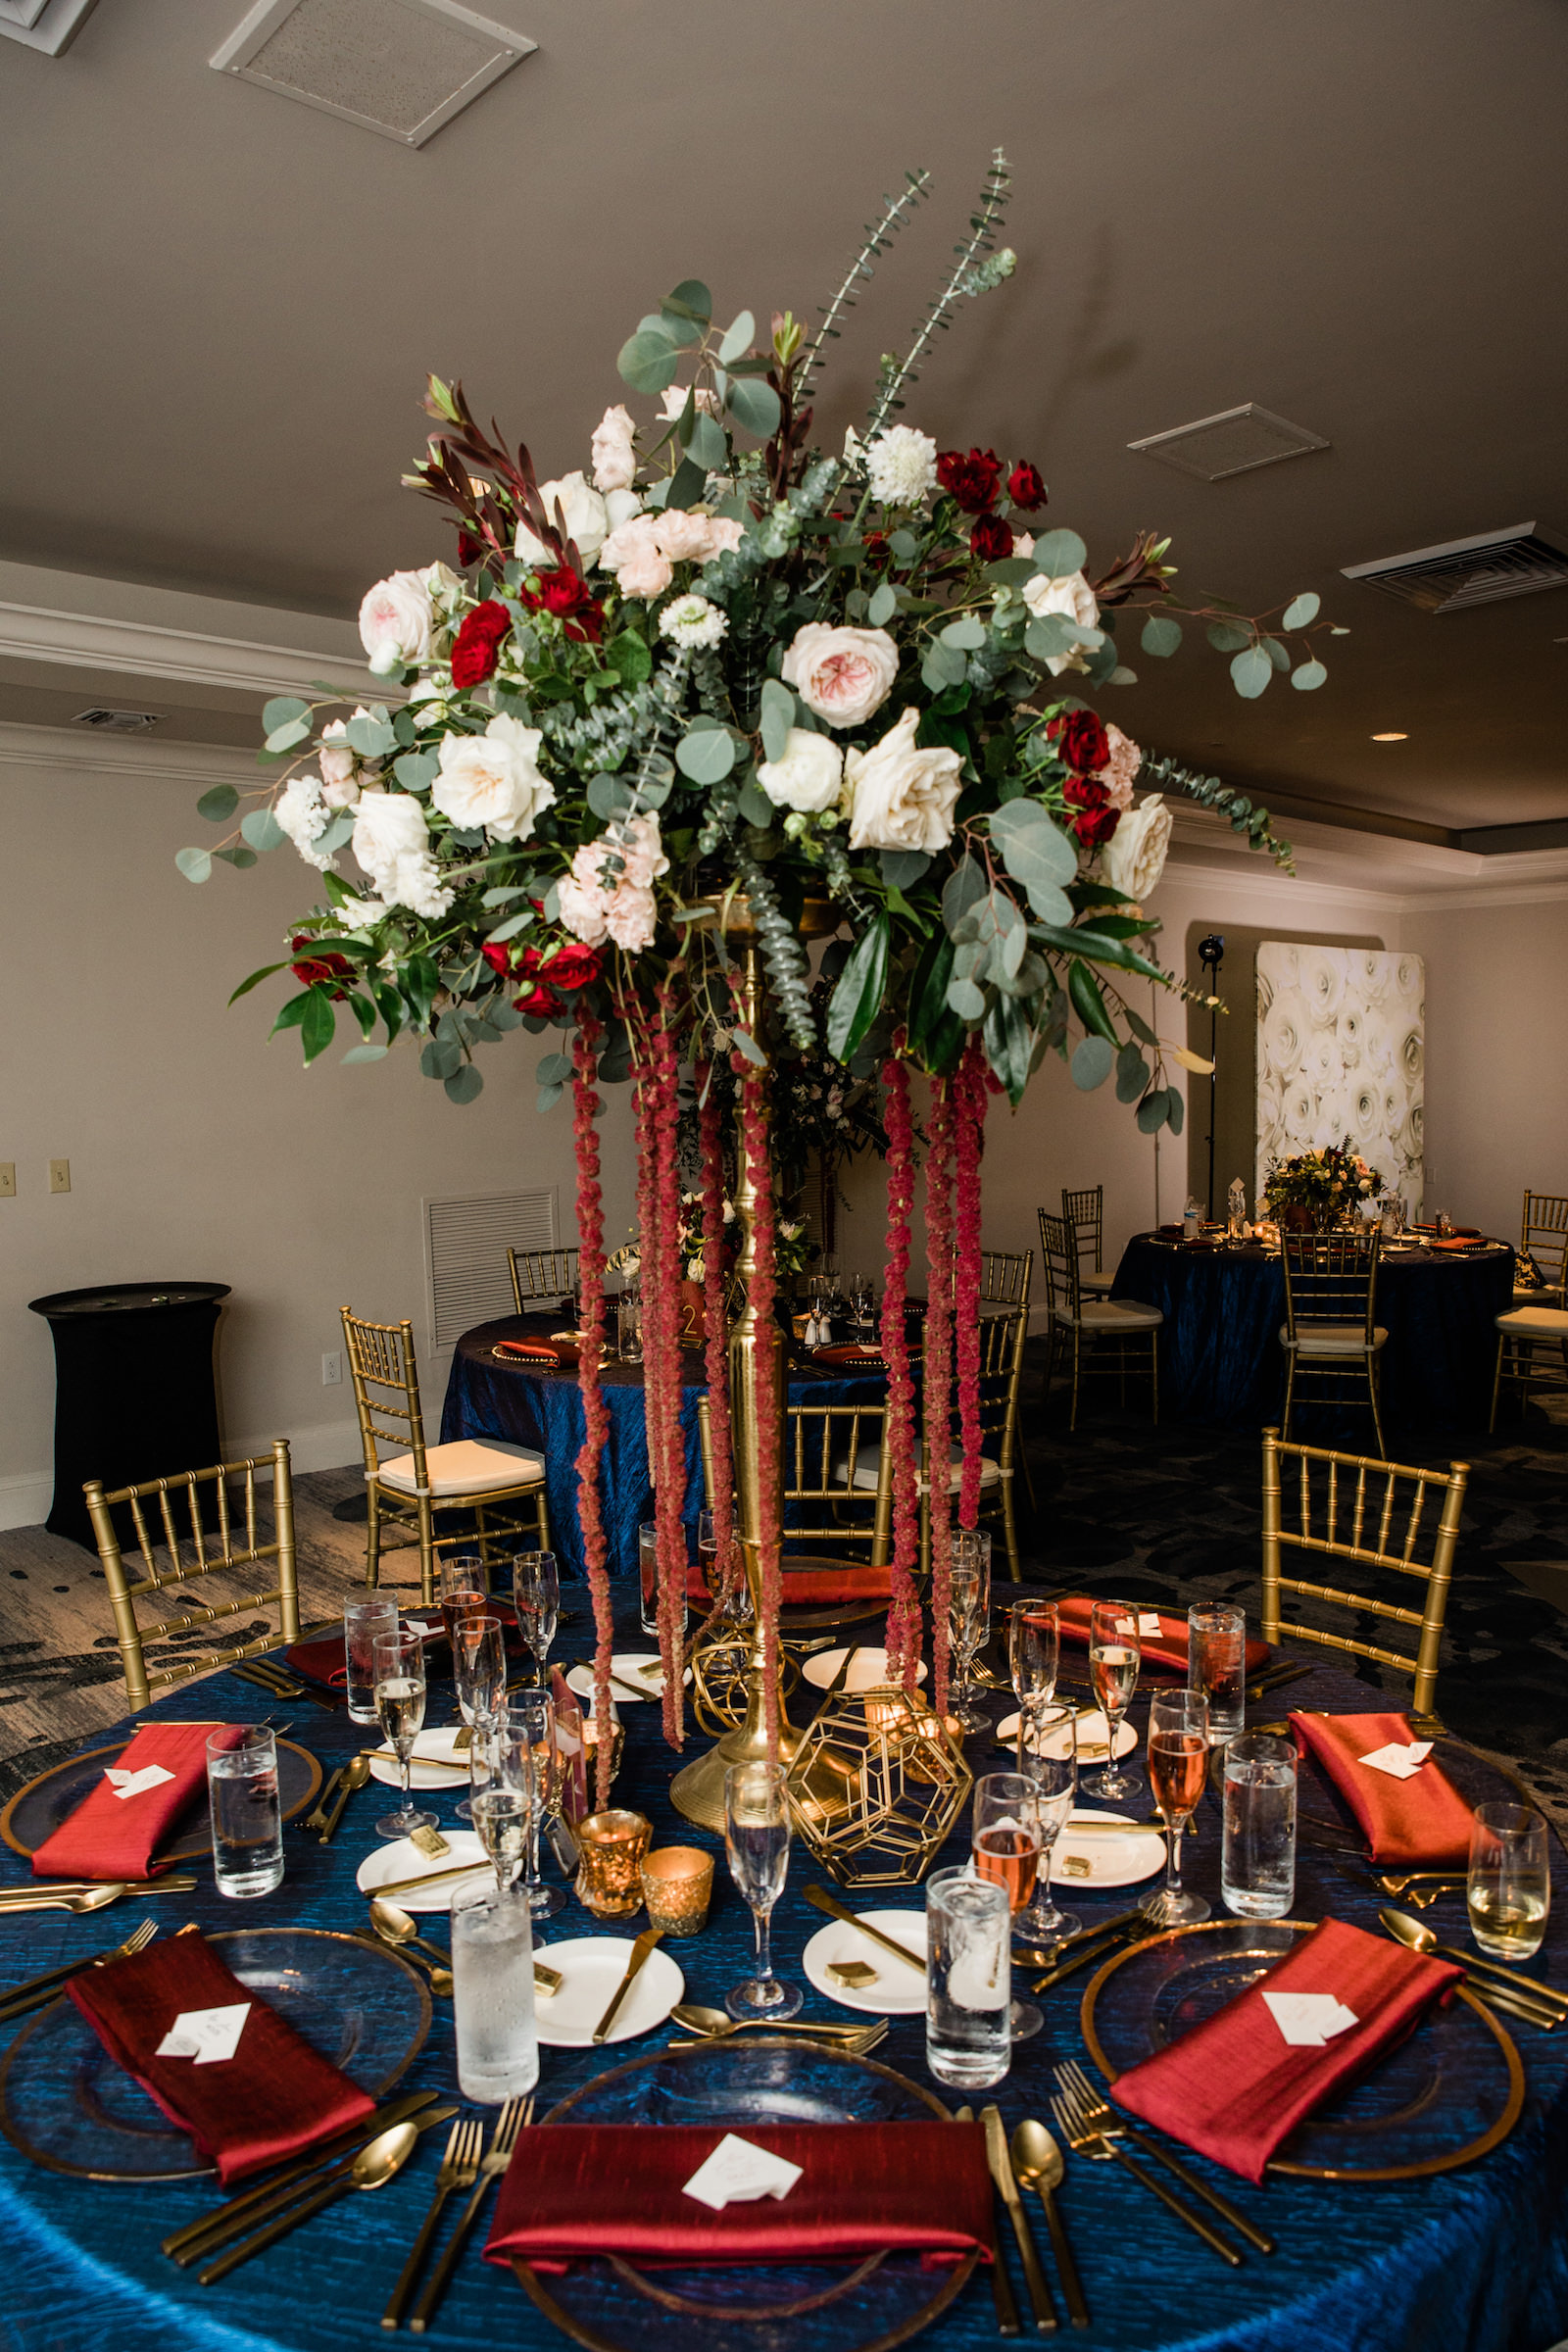 Elegant Navy Wedding Reception Decor, Tall Gold Vase with Greenery, Blush Pink and White Roses, Dark Purple and Red Flowers with Hanging Amaranthus Flower Centerpiece, Navy Blue Table Linen, Gold Chiavari Chairs | Tampa Bay Wedding Florist Botanica | St. Petersburg Wedding Venue The Don Cesar